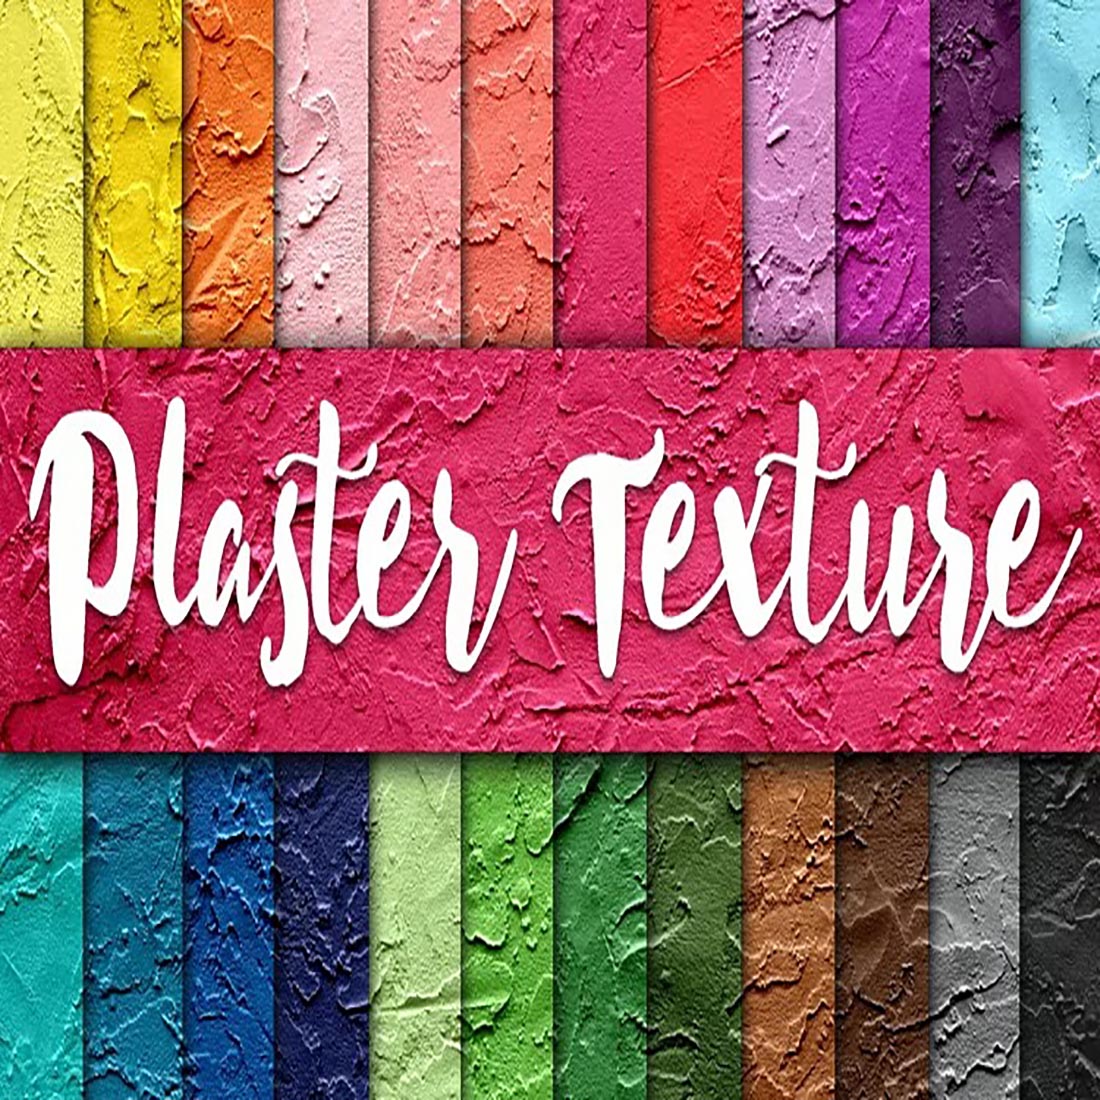 Plaster Texture Digital Paper preview image.